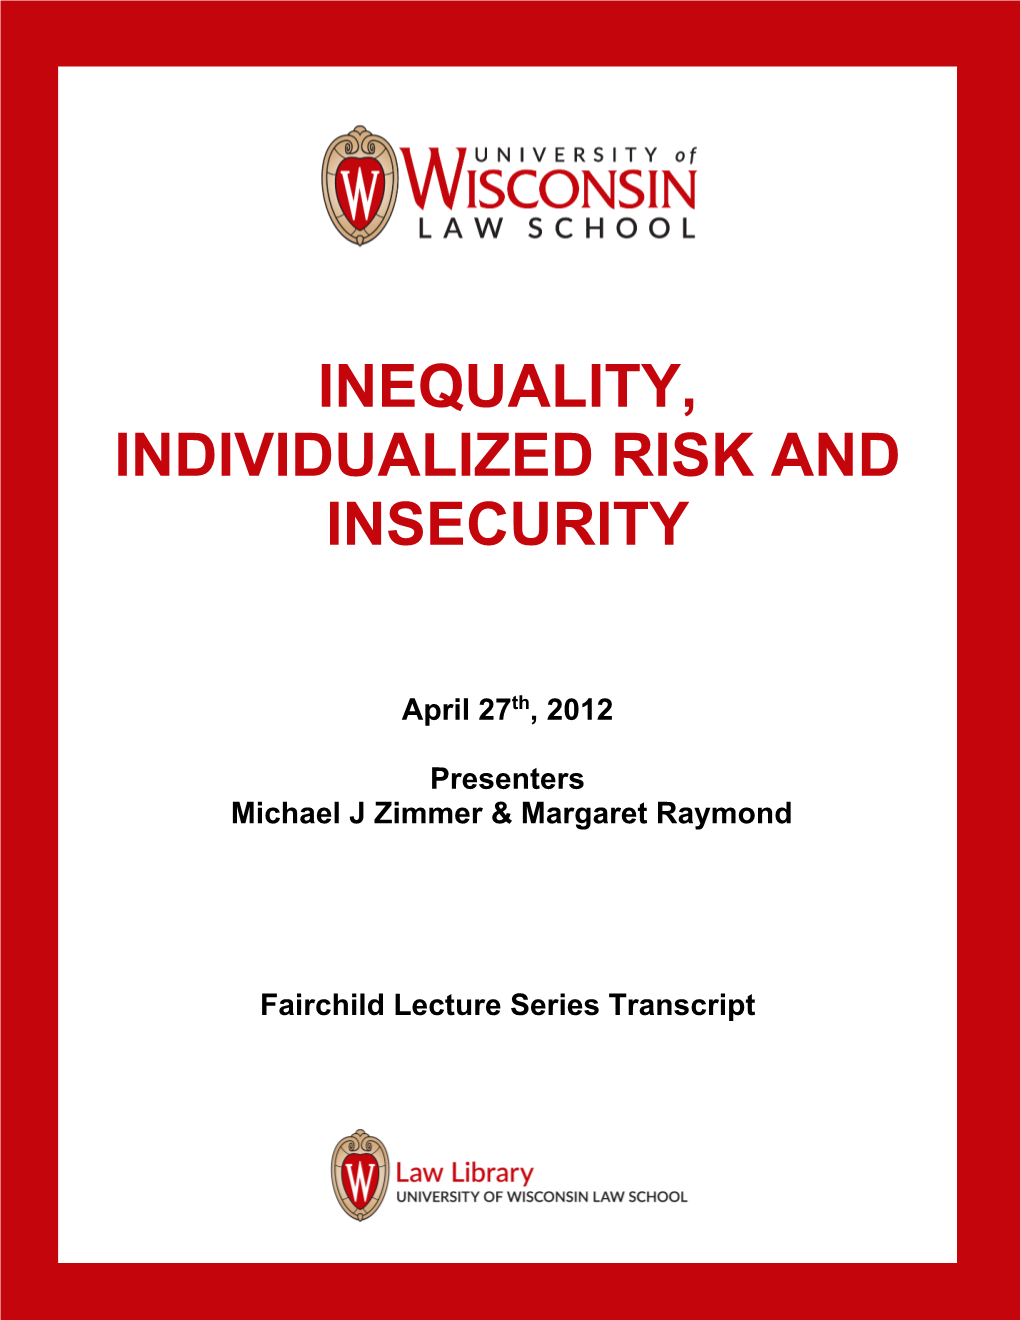 Inequality, Individualized Risk and Insecurity